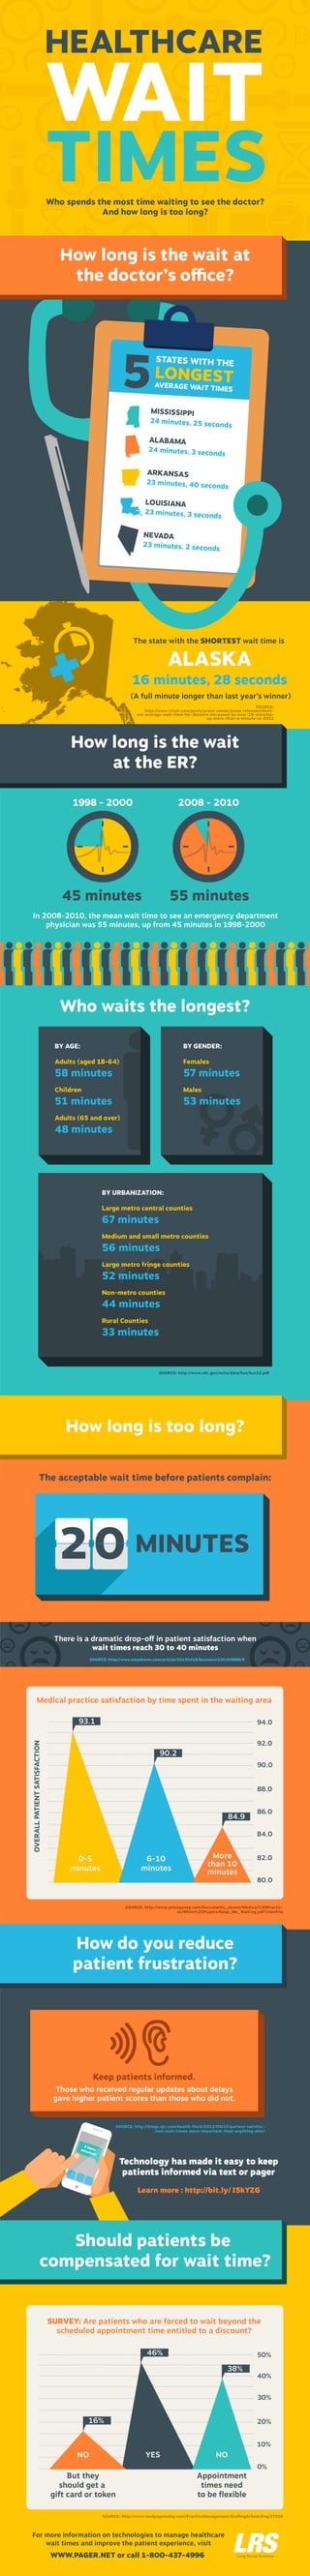 Healthcare Wait Times - Infographic